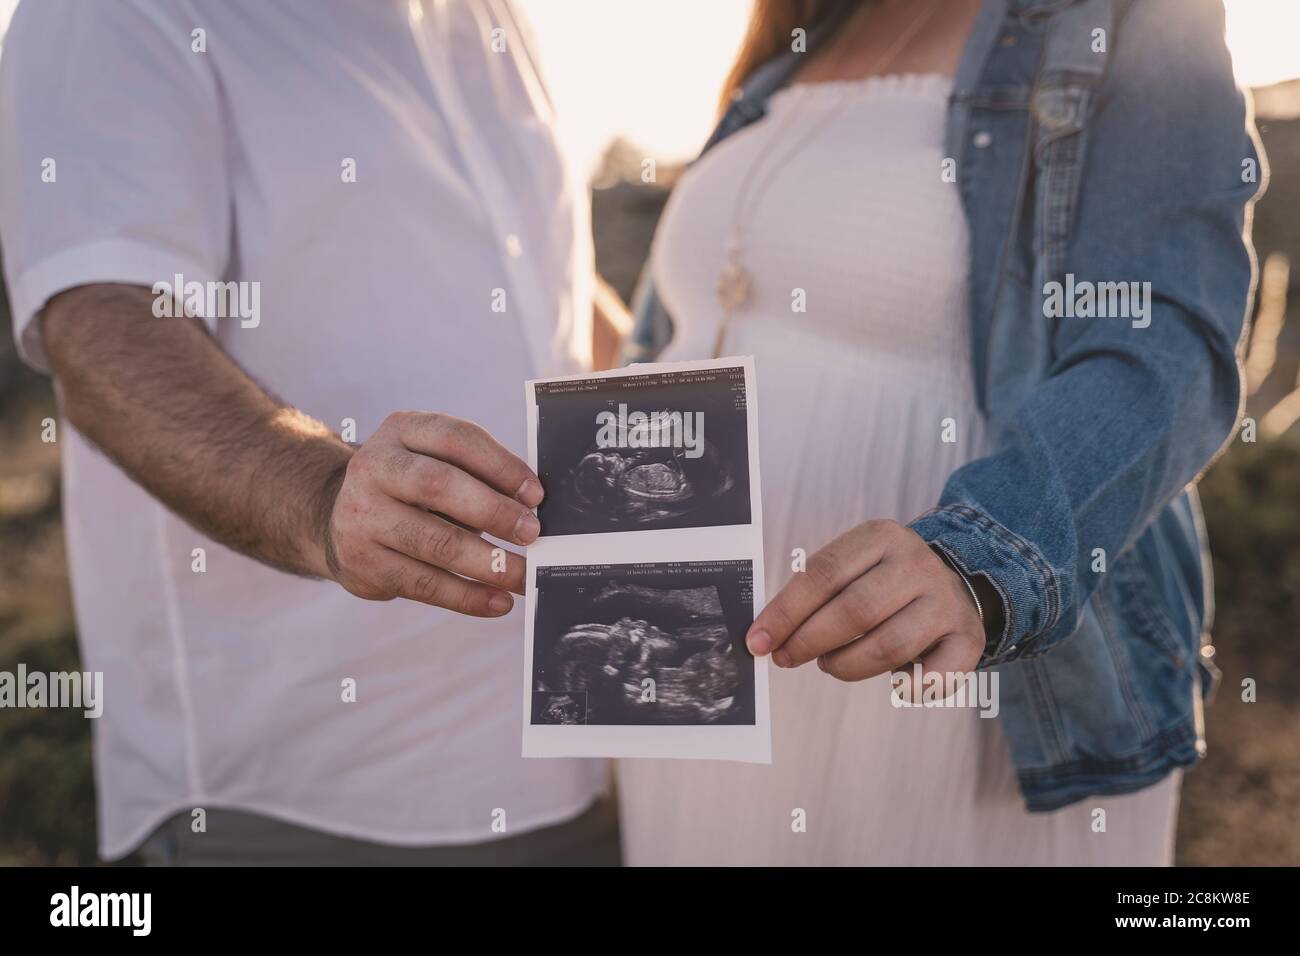 A pregnant woman looking at her echography. Stock Photo